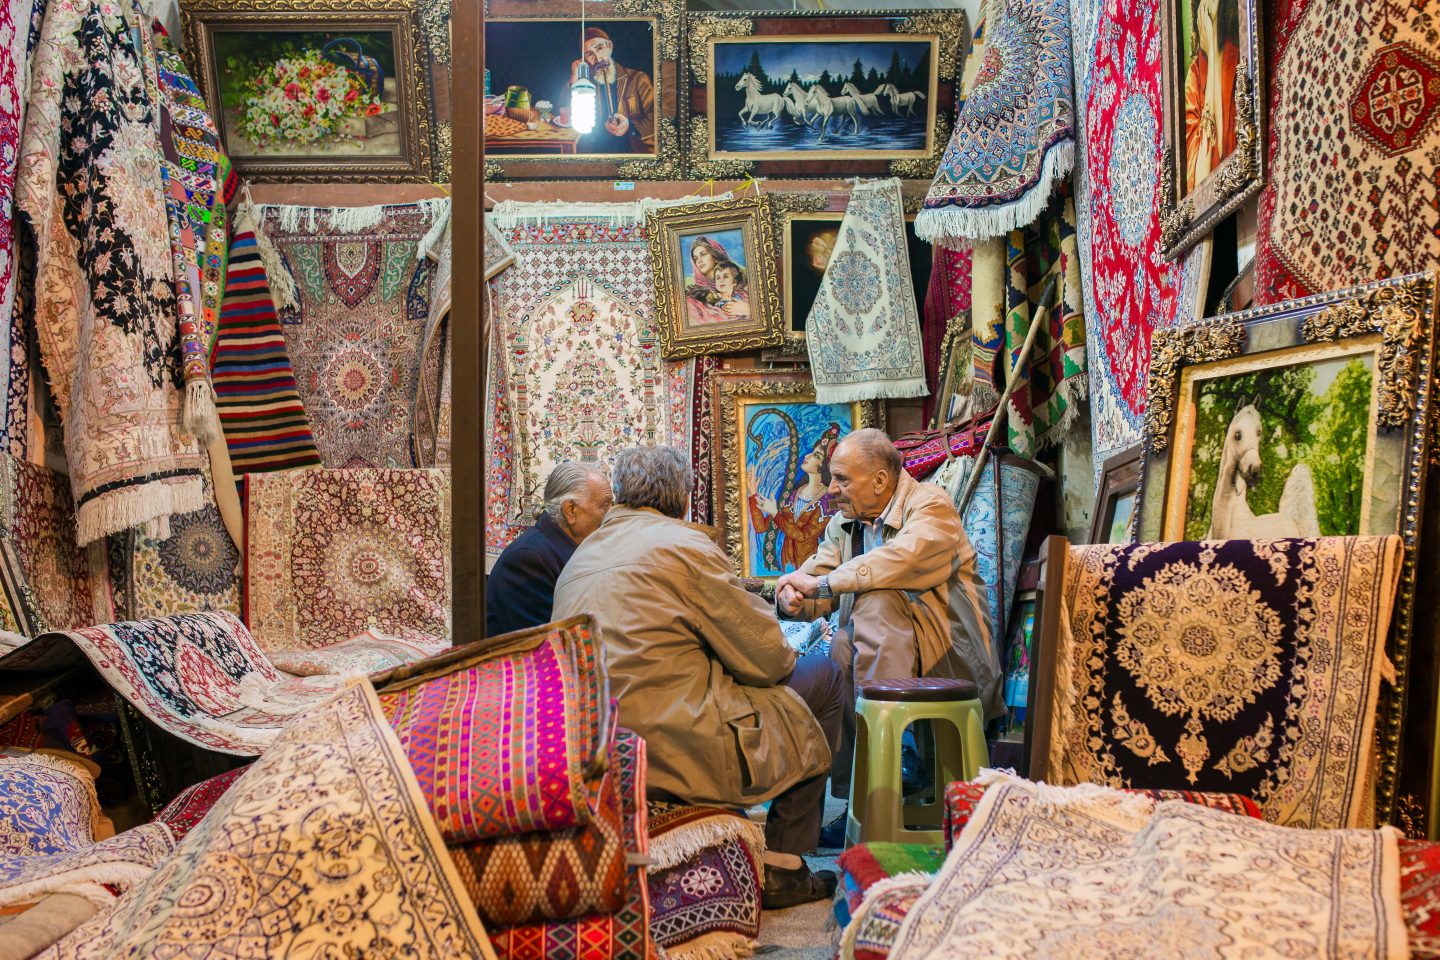 Shop in one of the magnificent bazaars in Iran